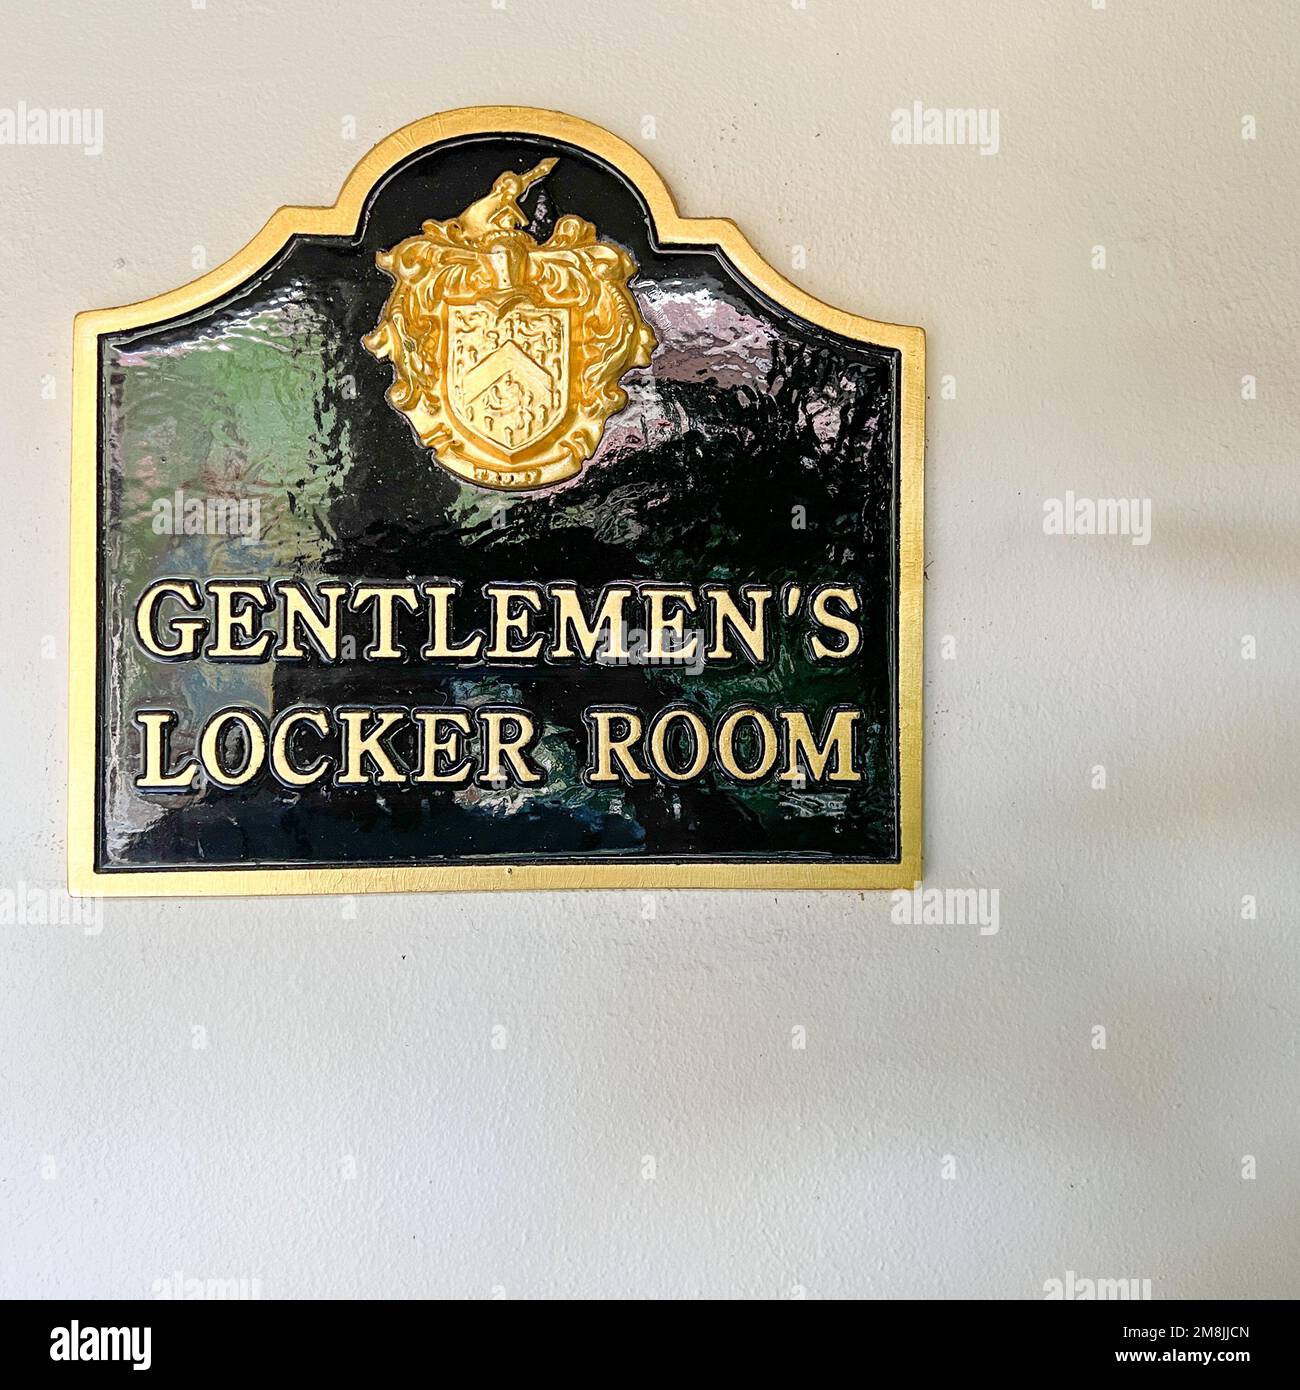 Jupiter, FL USA - May 31, 2022:  The Gentlemens Locker Room sign at the Trump National Golf Course club House in Jupiter, Florida. Stock Photo